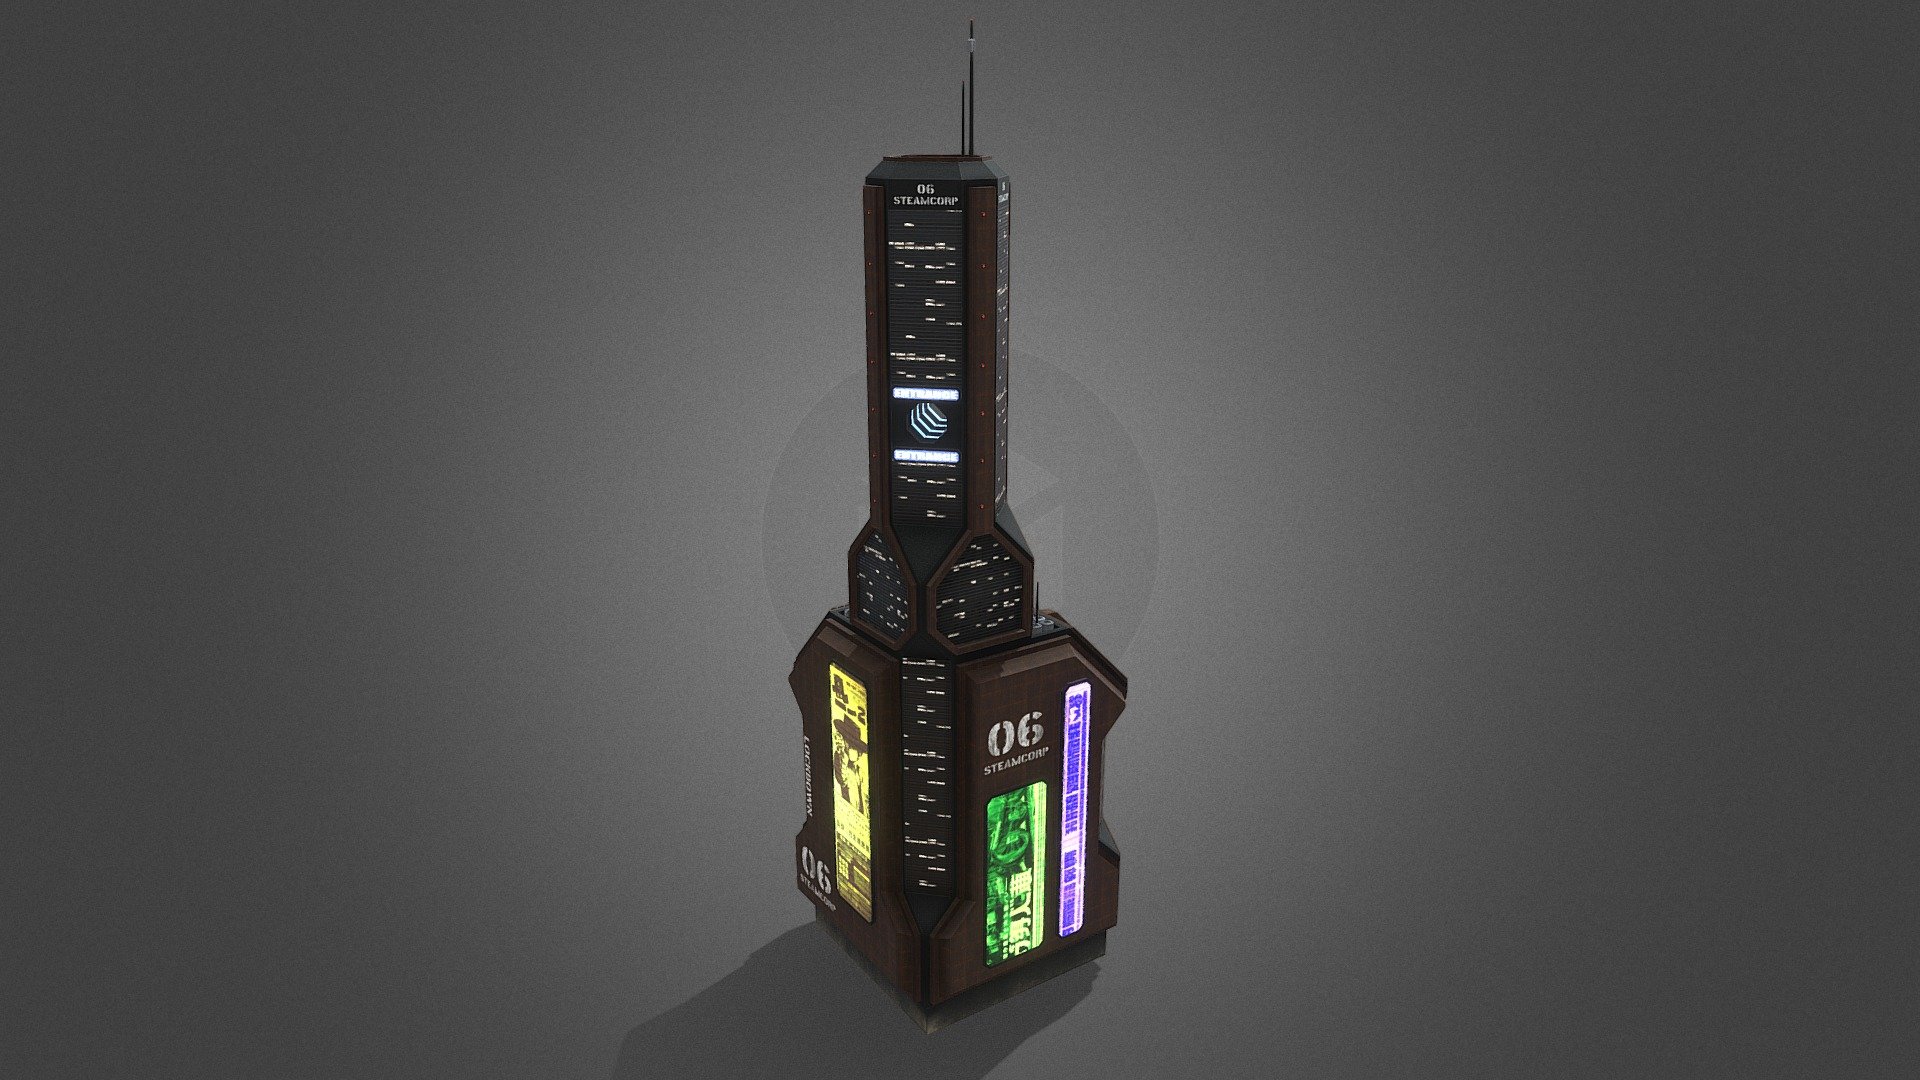 LowPoly SciFi/Cyberpunk Building Zip file contain - FBX, GLB, GLTF, OBJ, x3d formats and also a .blend file. 

Texture maps in 4 resolutions : 512x512, 1024x1024, 2048x2048, 4096x4096 

* Color/Diffuse * Roughness map * Normal map * Emission map * AO map * glossiness map 

 

I hope you will enjoy my product! If you have questions about this model or you have a problem send me a message: . 

Check out my other models in this style! I hope you will enjoy this model! 

 

Artstation: https://www.artstation.com/aroba 

IG: https://www.instagram.com/blue.blender.print/ 

 

“One or more textures bundled with this project have been created with images from Textures.com.” 
 - SciFi Cyberpunk Building 06 - Buy Royalty Free 3D model by @blue.blender.print (@arobaco) 3d model